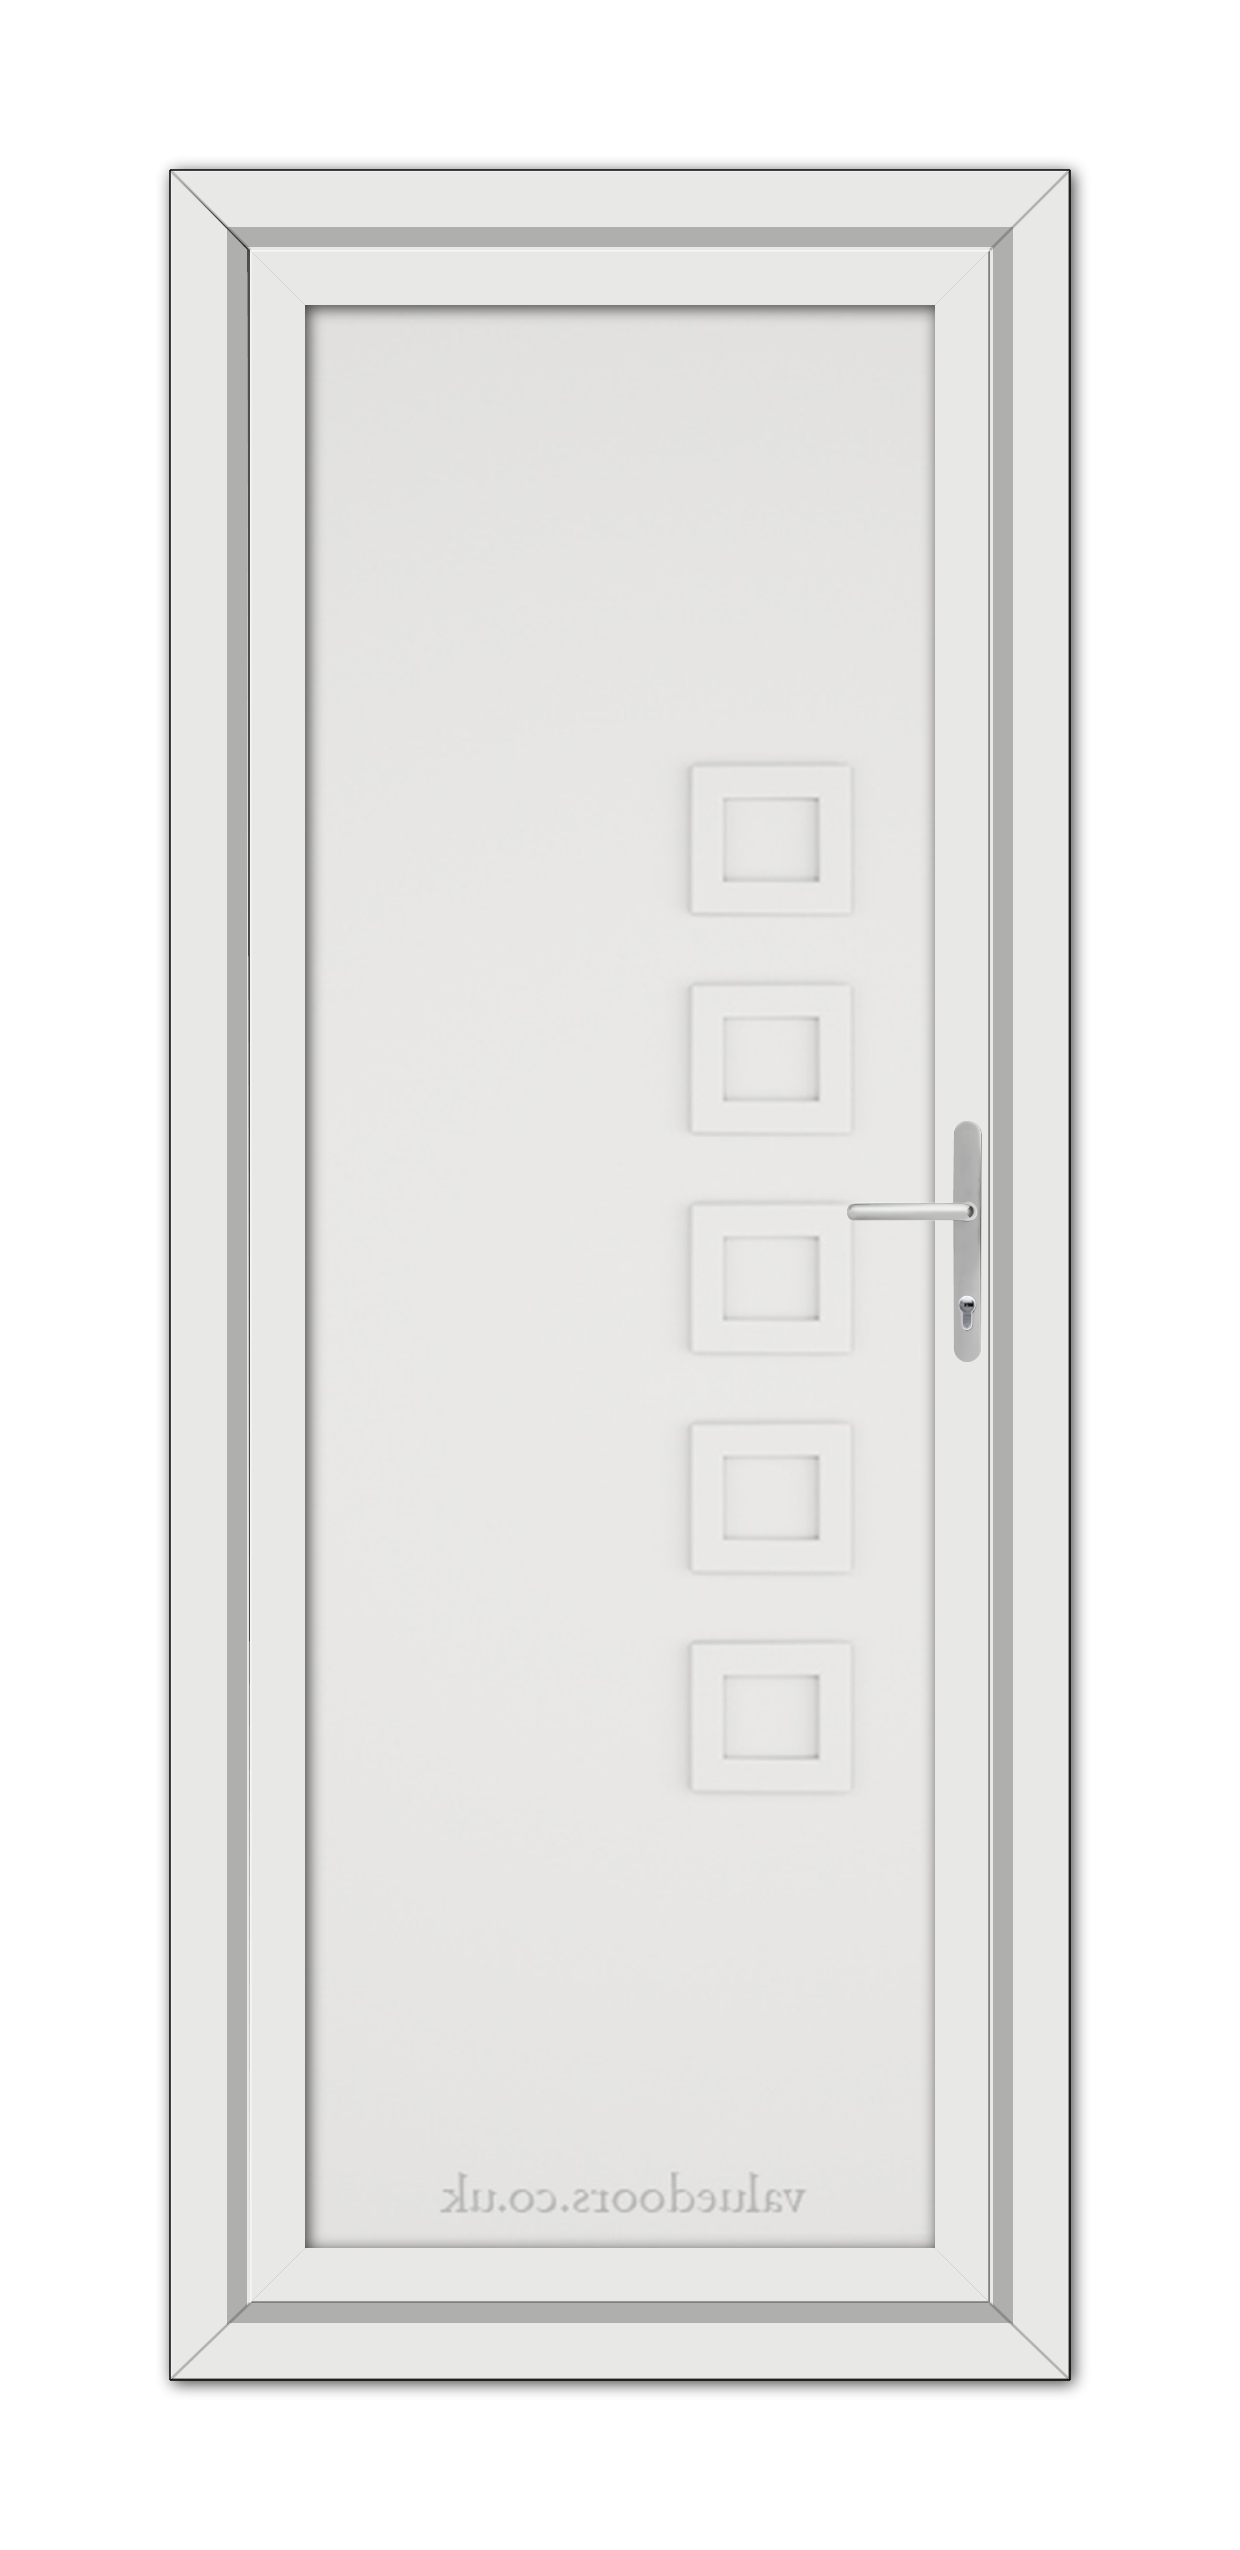 A White Malaga Solid uPVC Door with a metallic handle and multiple small square windows arranged vertically on the left side.